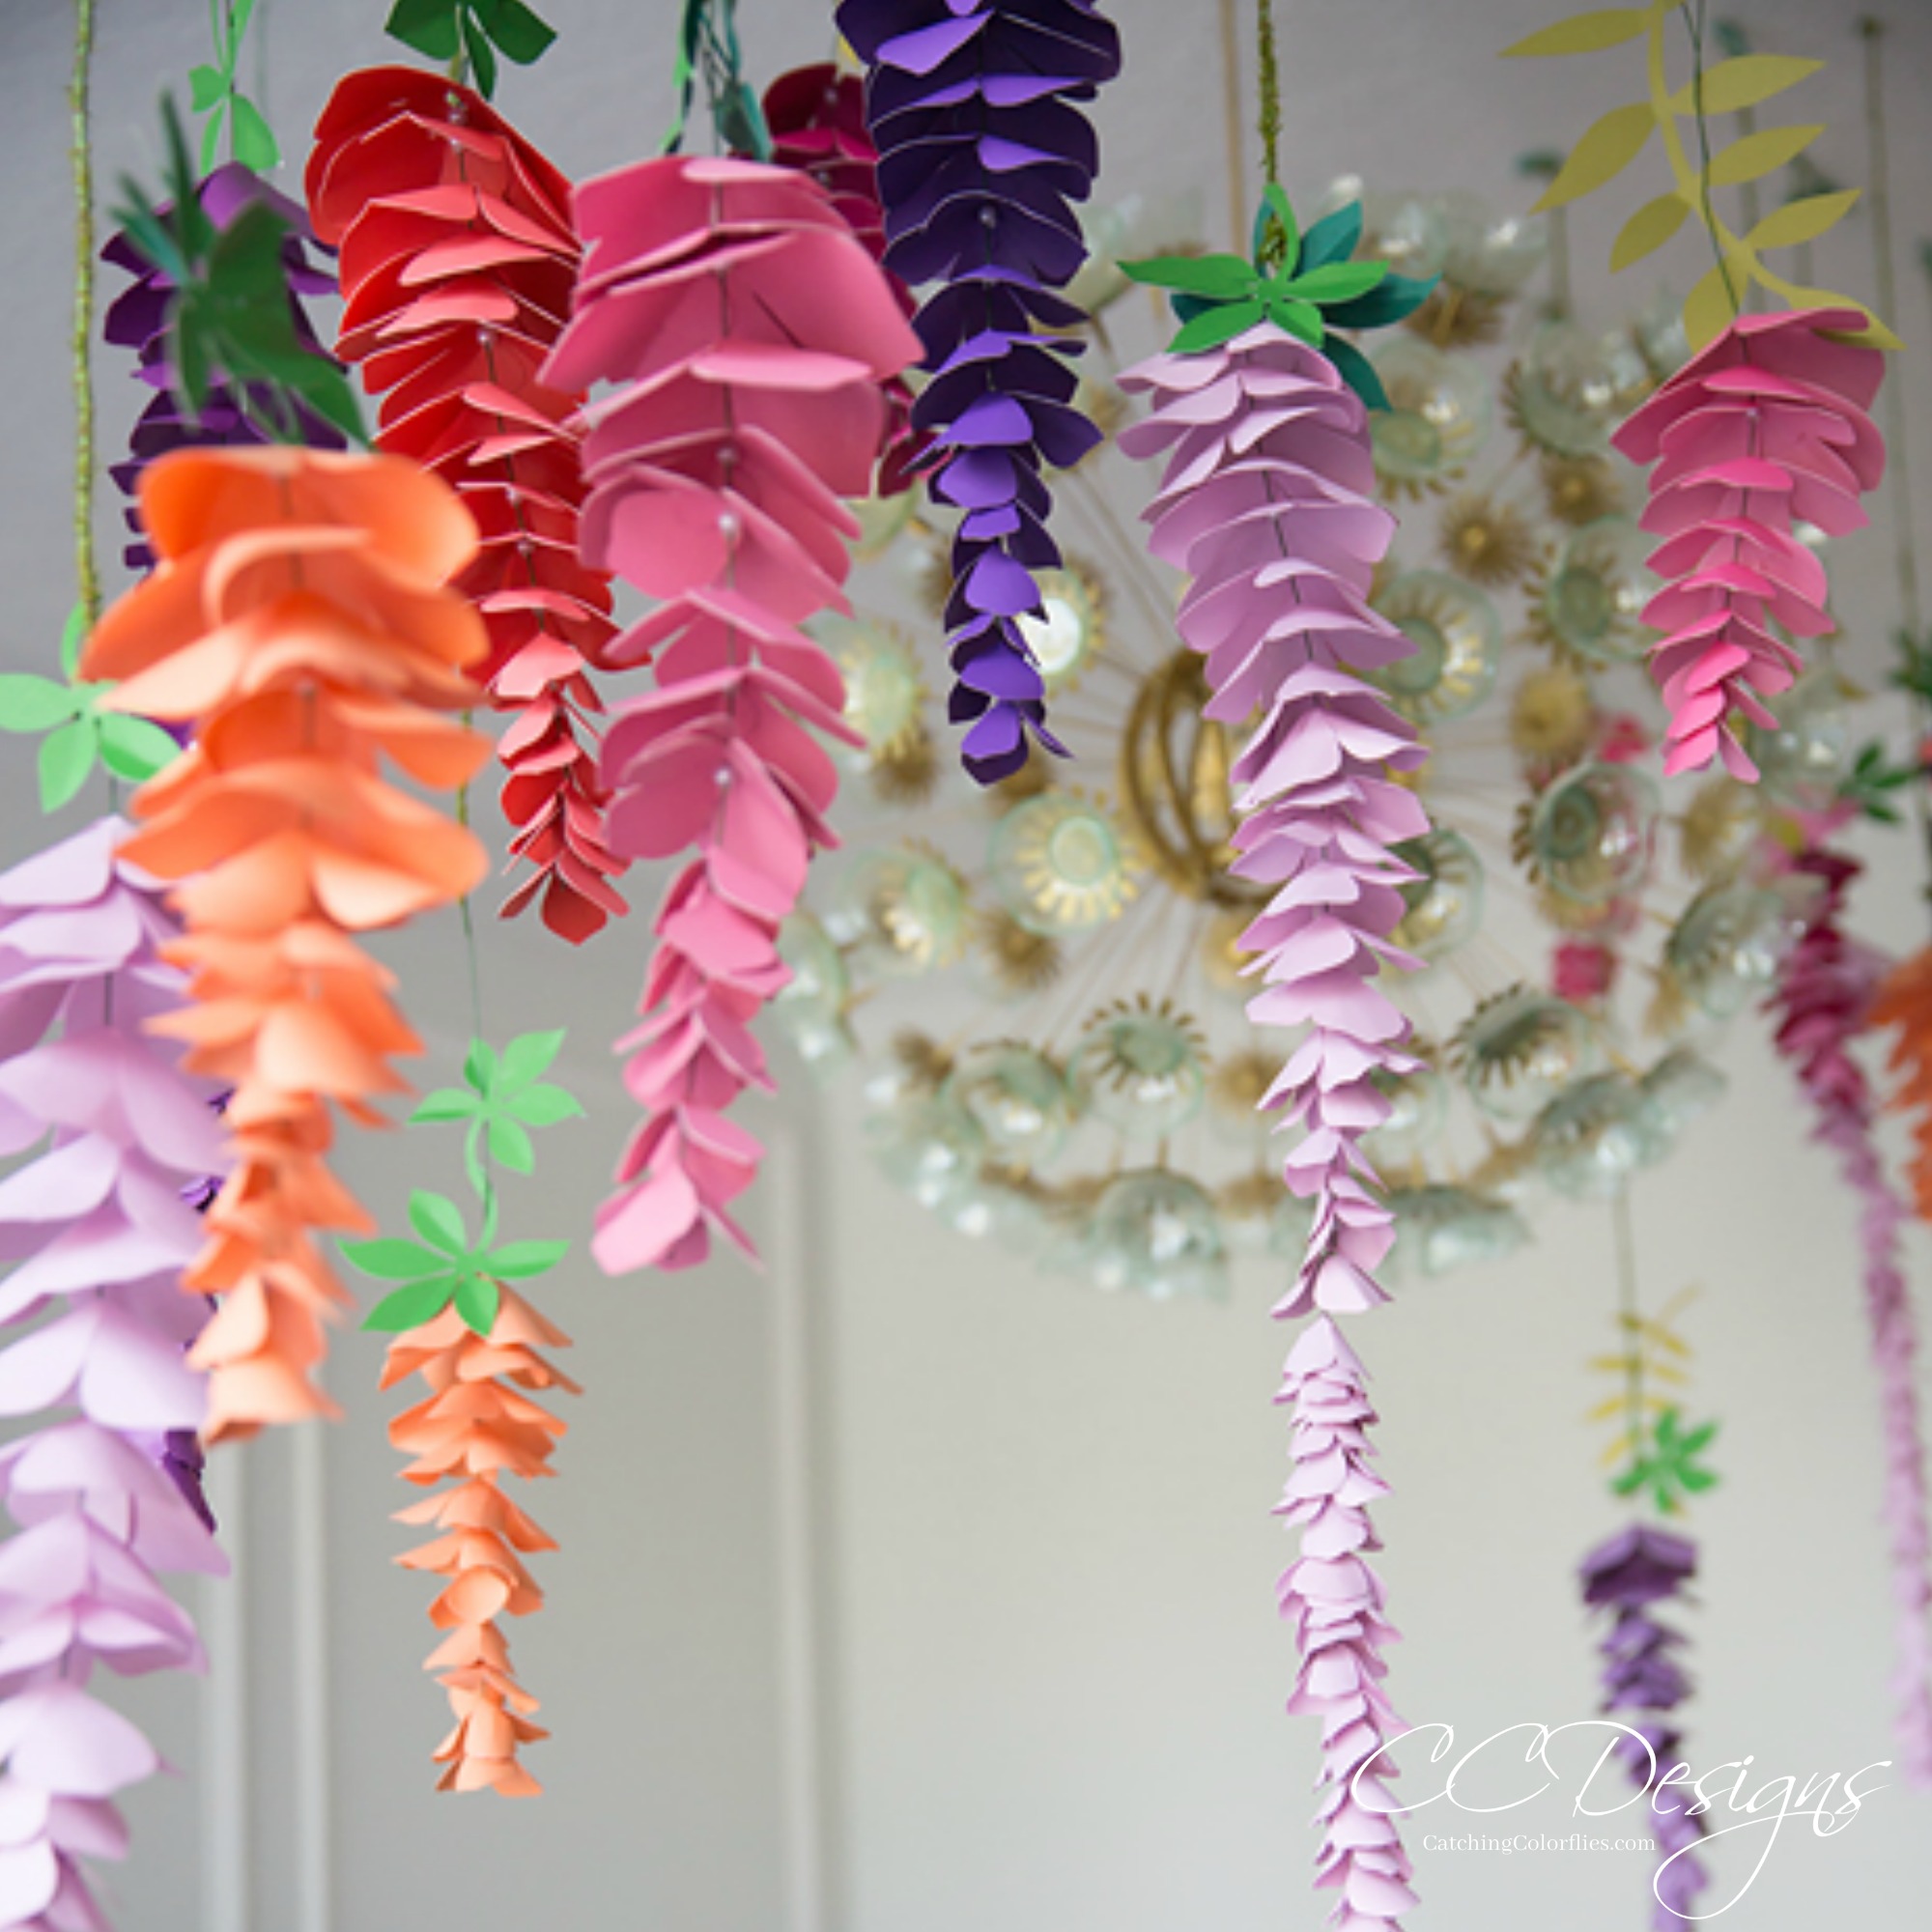 Paper wisteria flowers made from pink, purple, orange, and blue paper hangs from the ceiling.